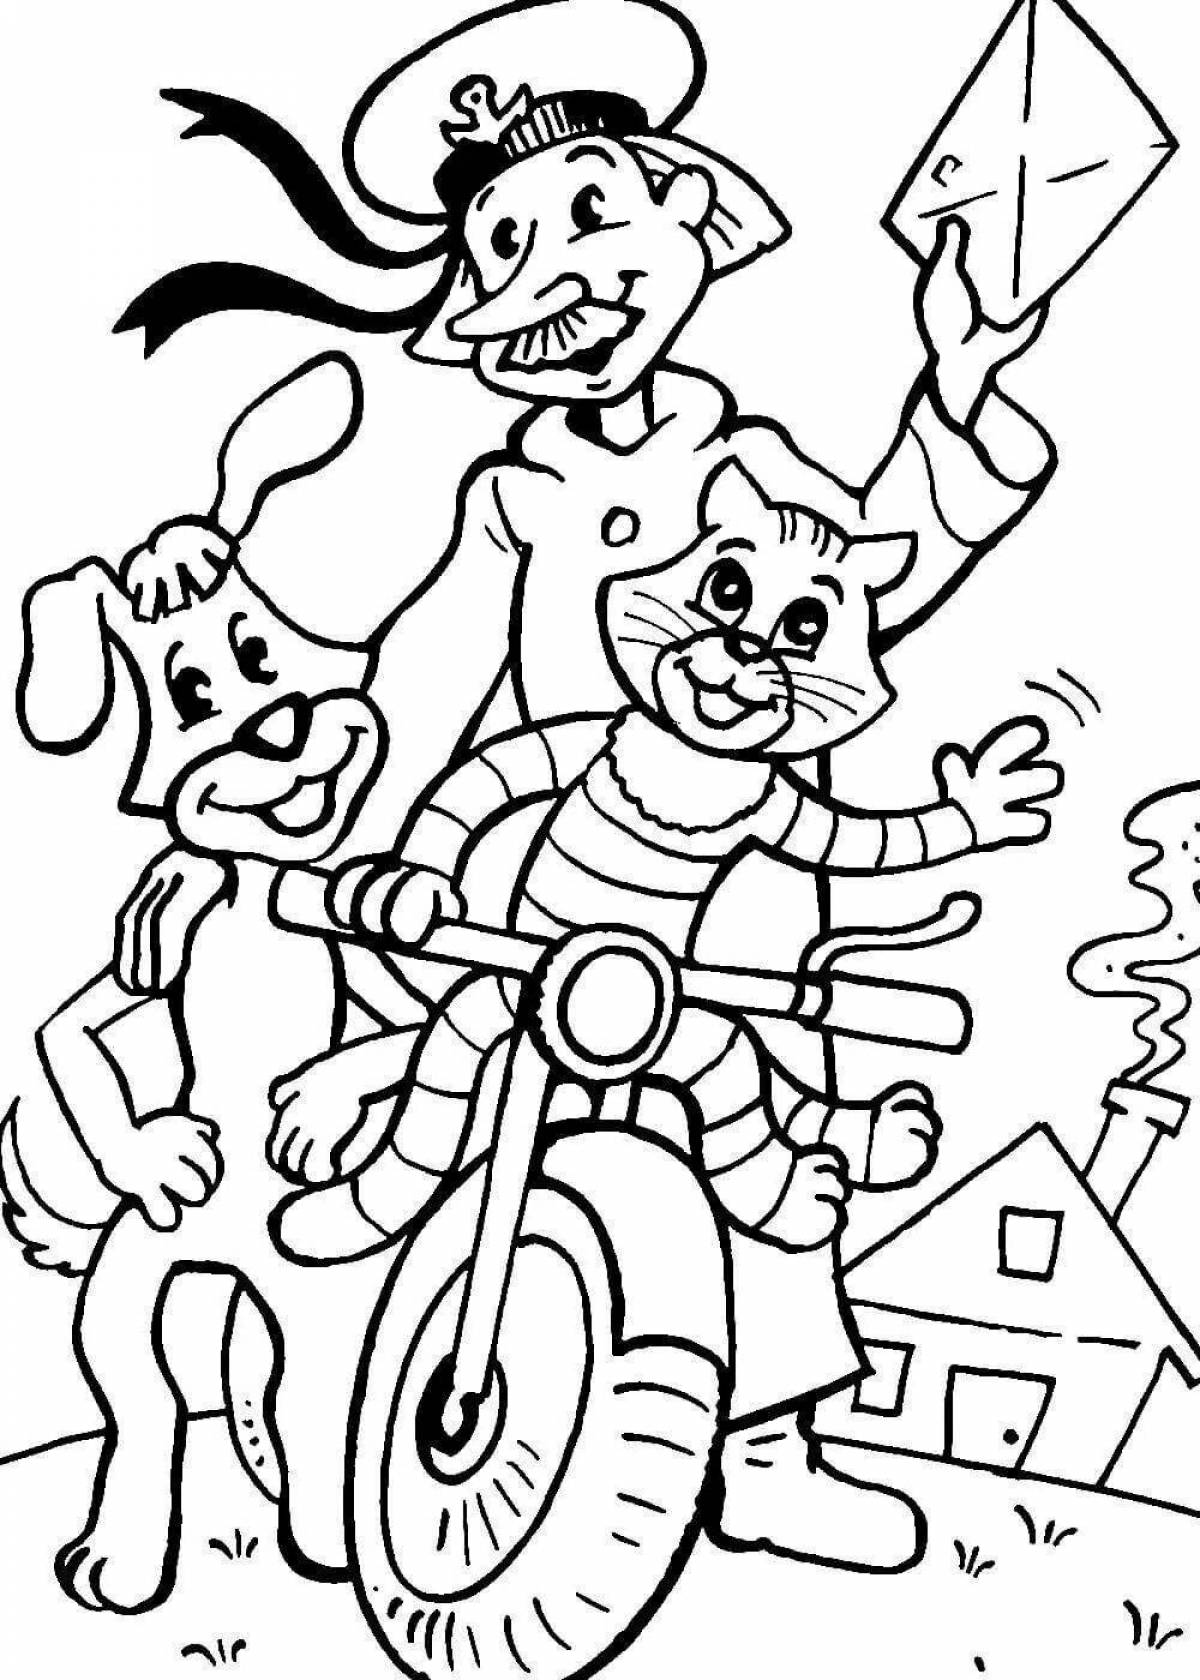 Great sailor skin coloring page for the little ones